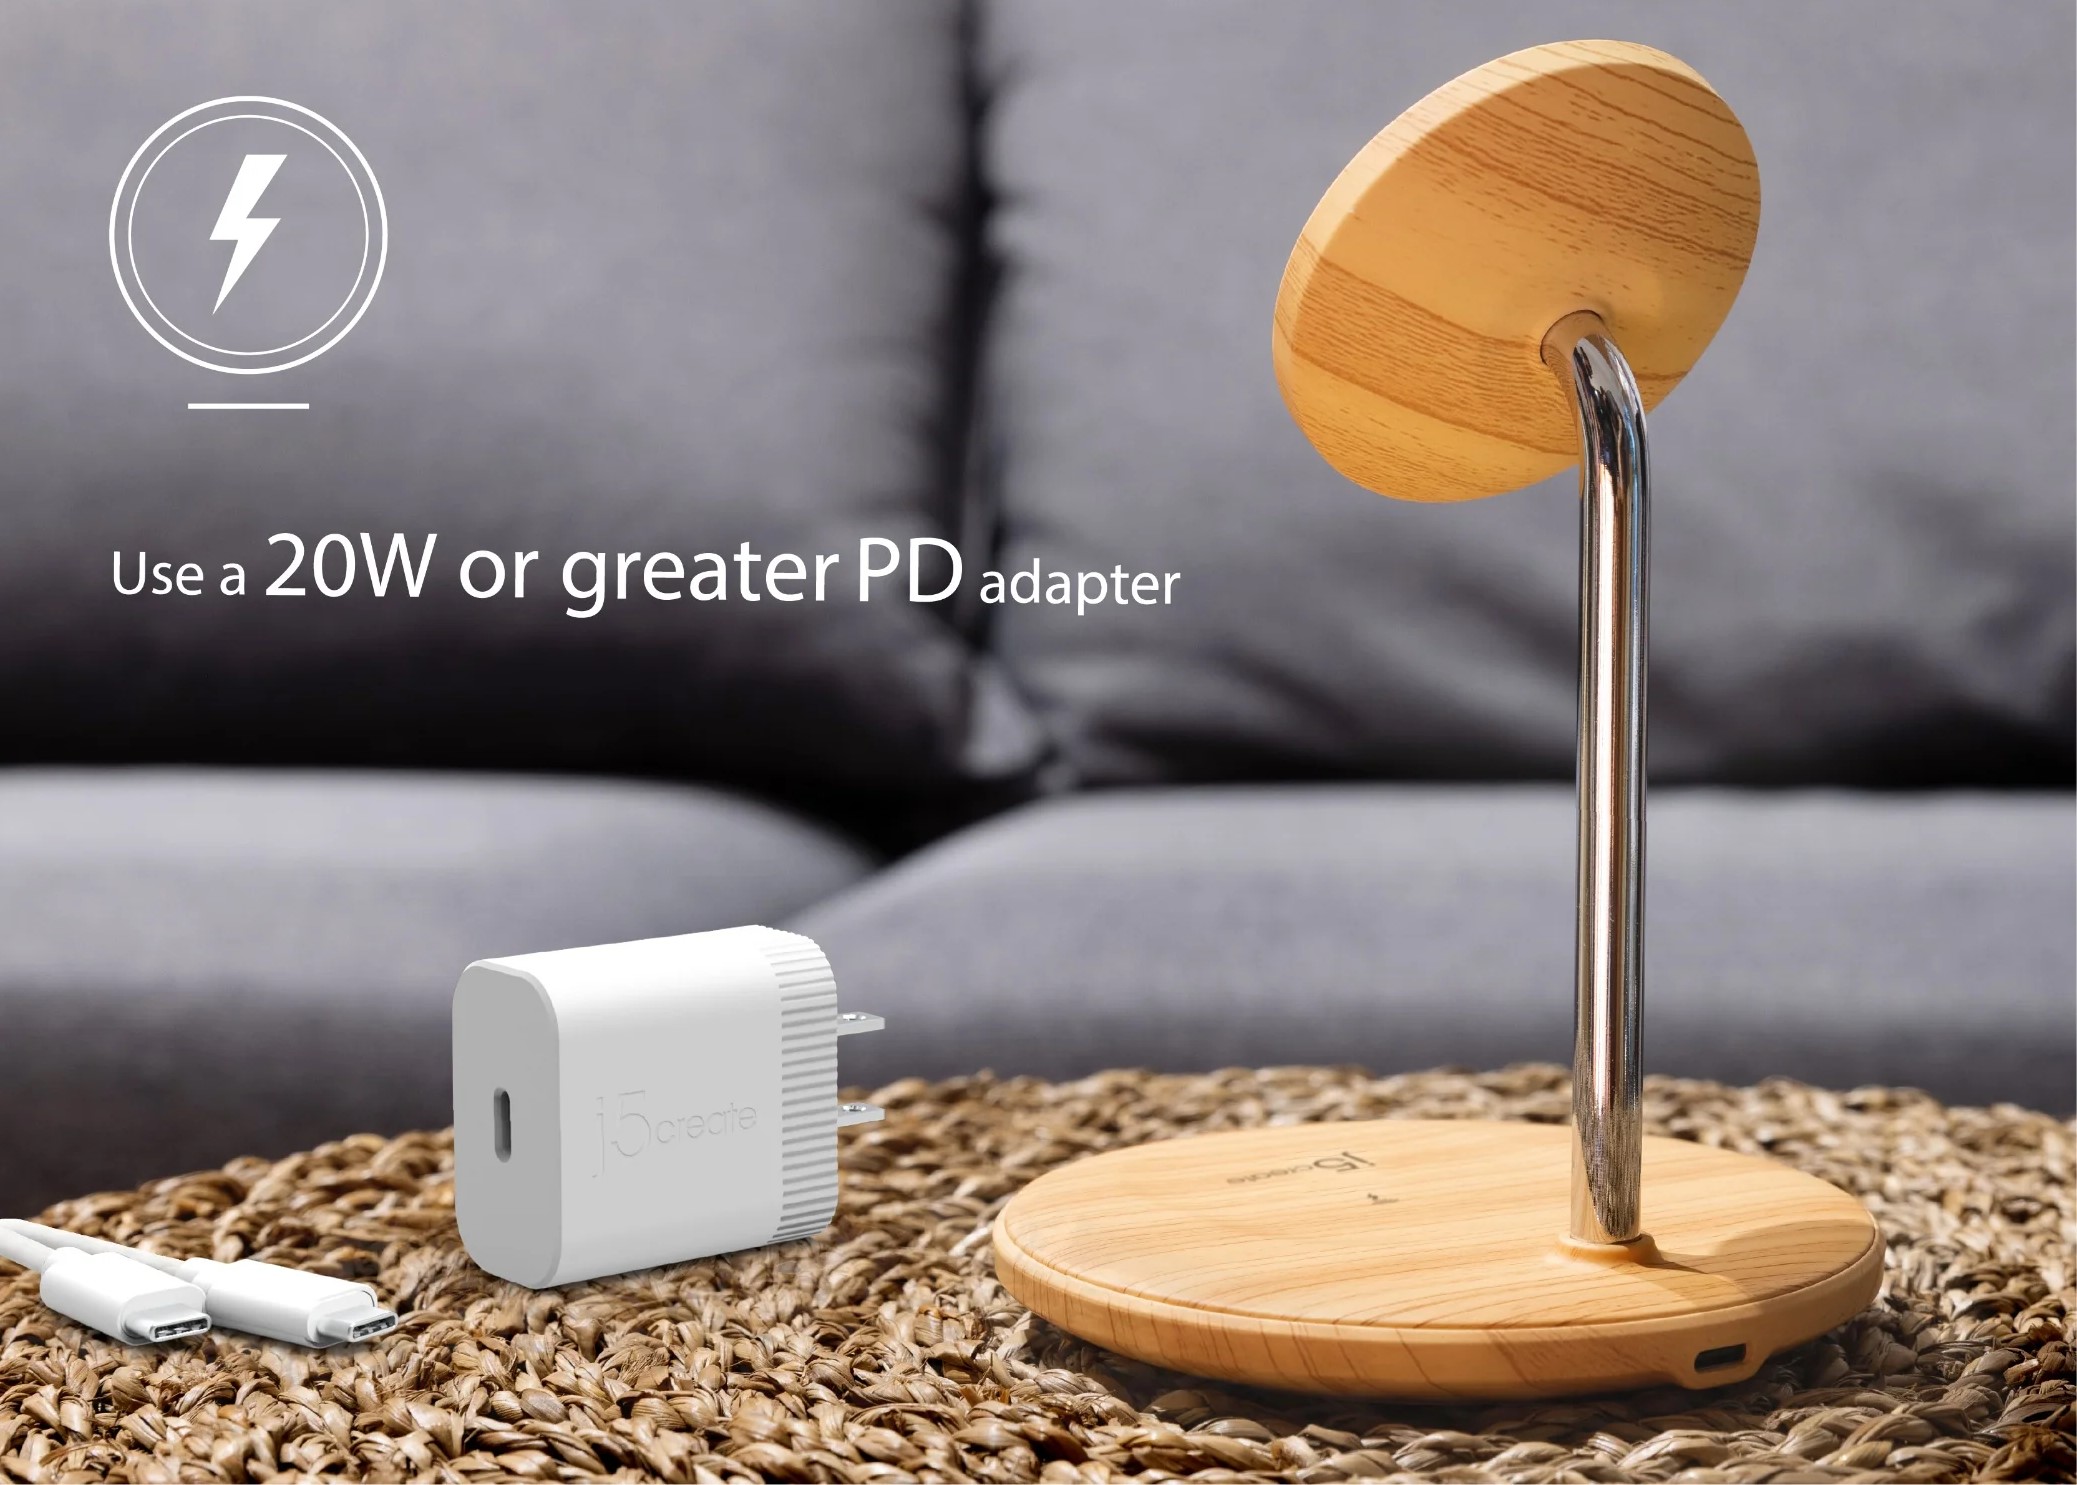 Wireless charger j5create JUPW2106 Magnetic 10W Wood Grain